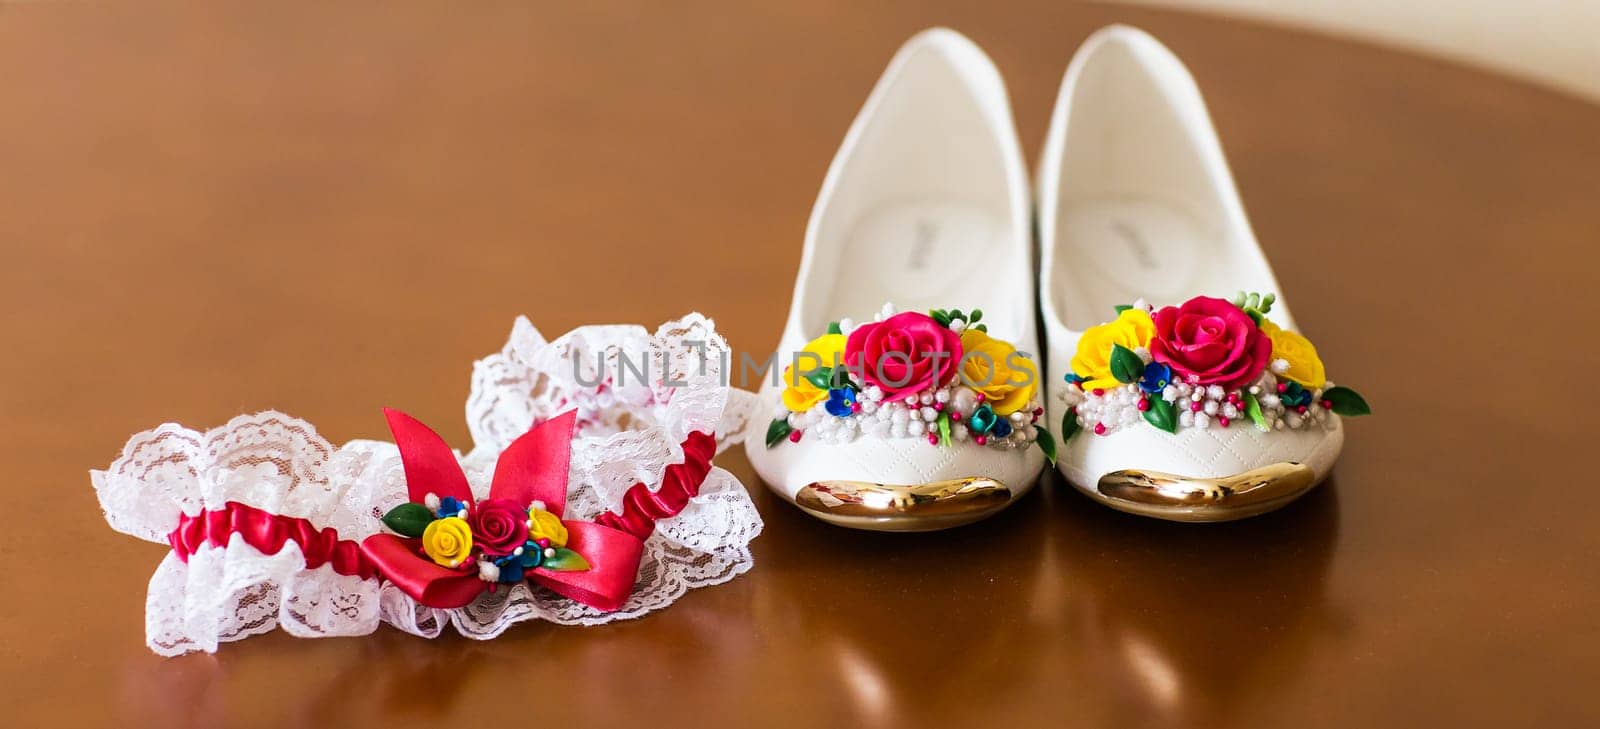 Elegant white flat shoes for women by Satura86